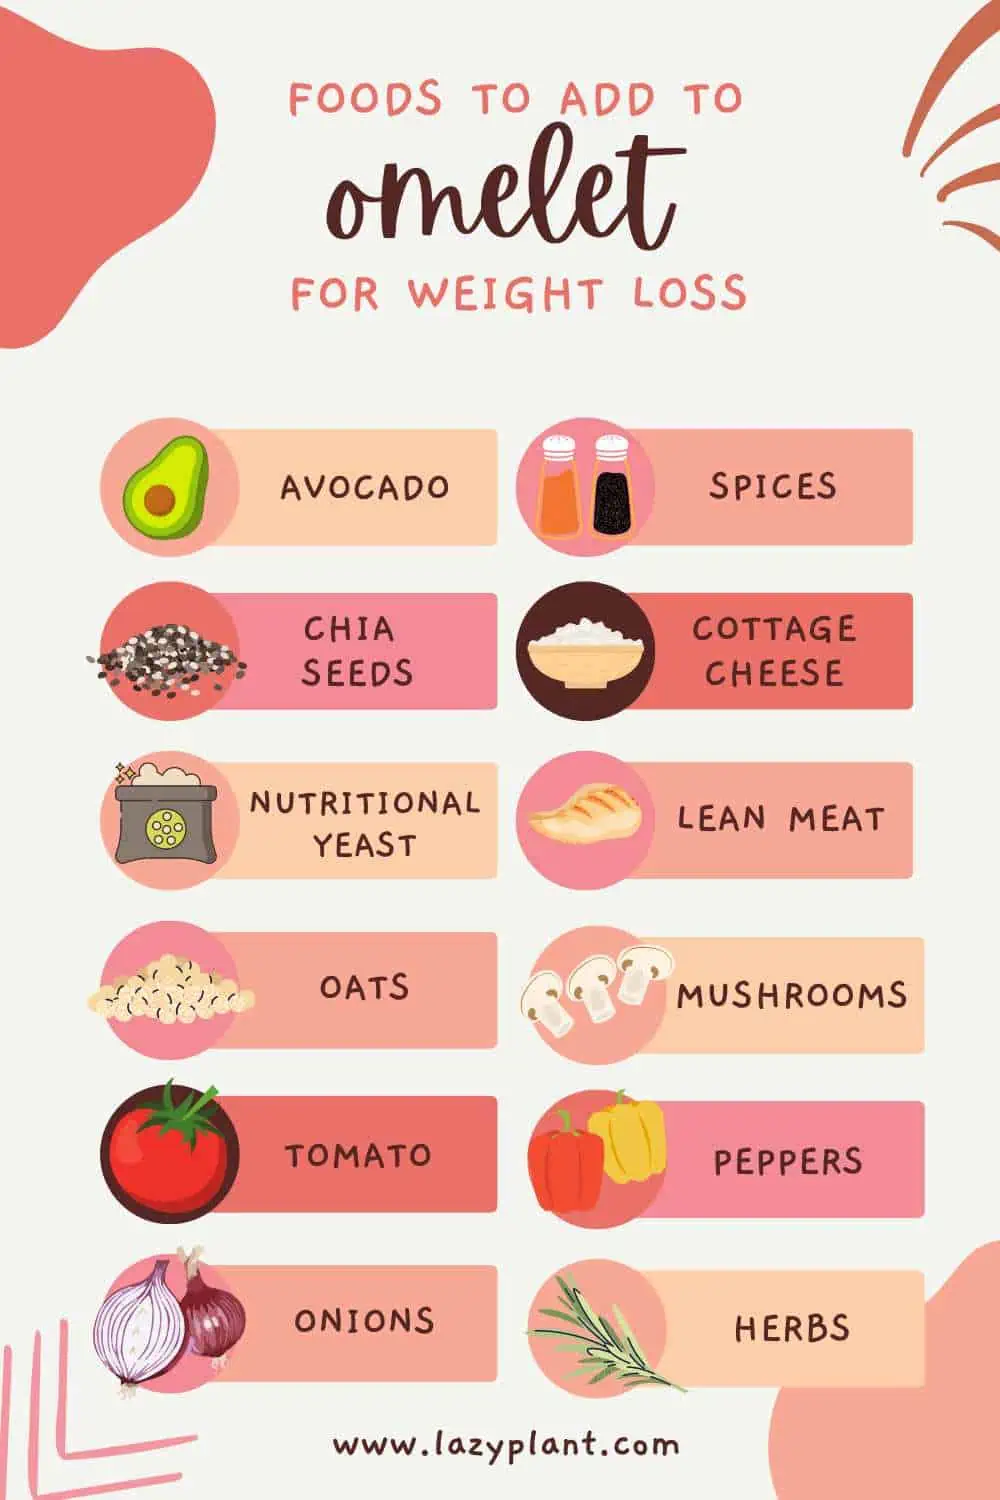 What foods should I add to omelet to lose weight?